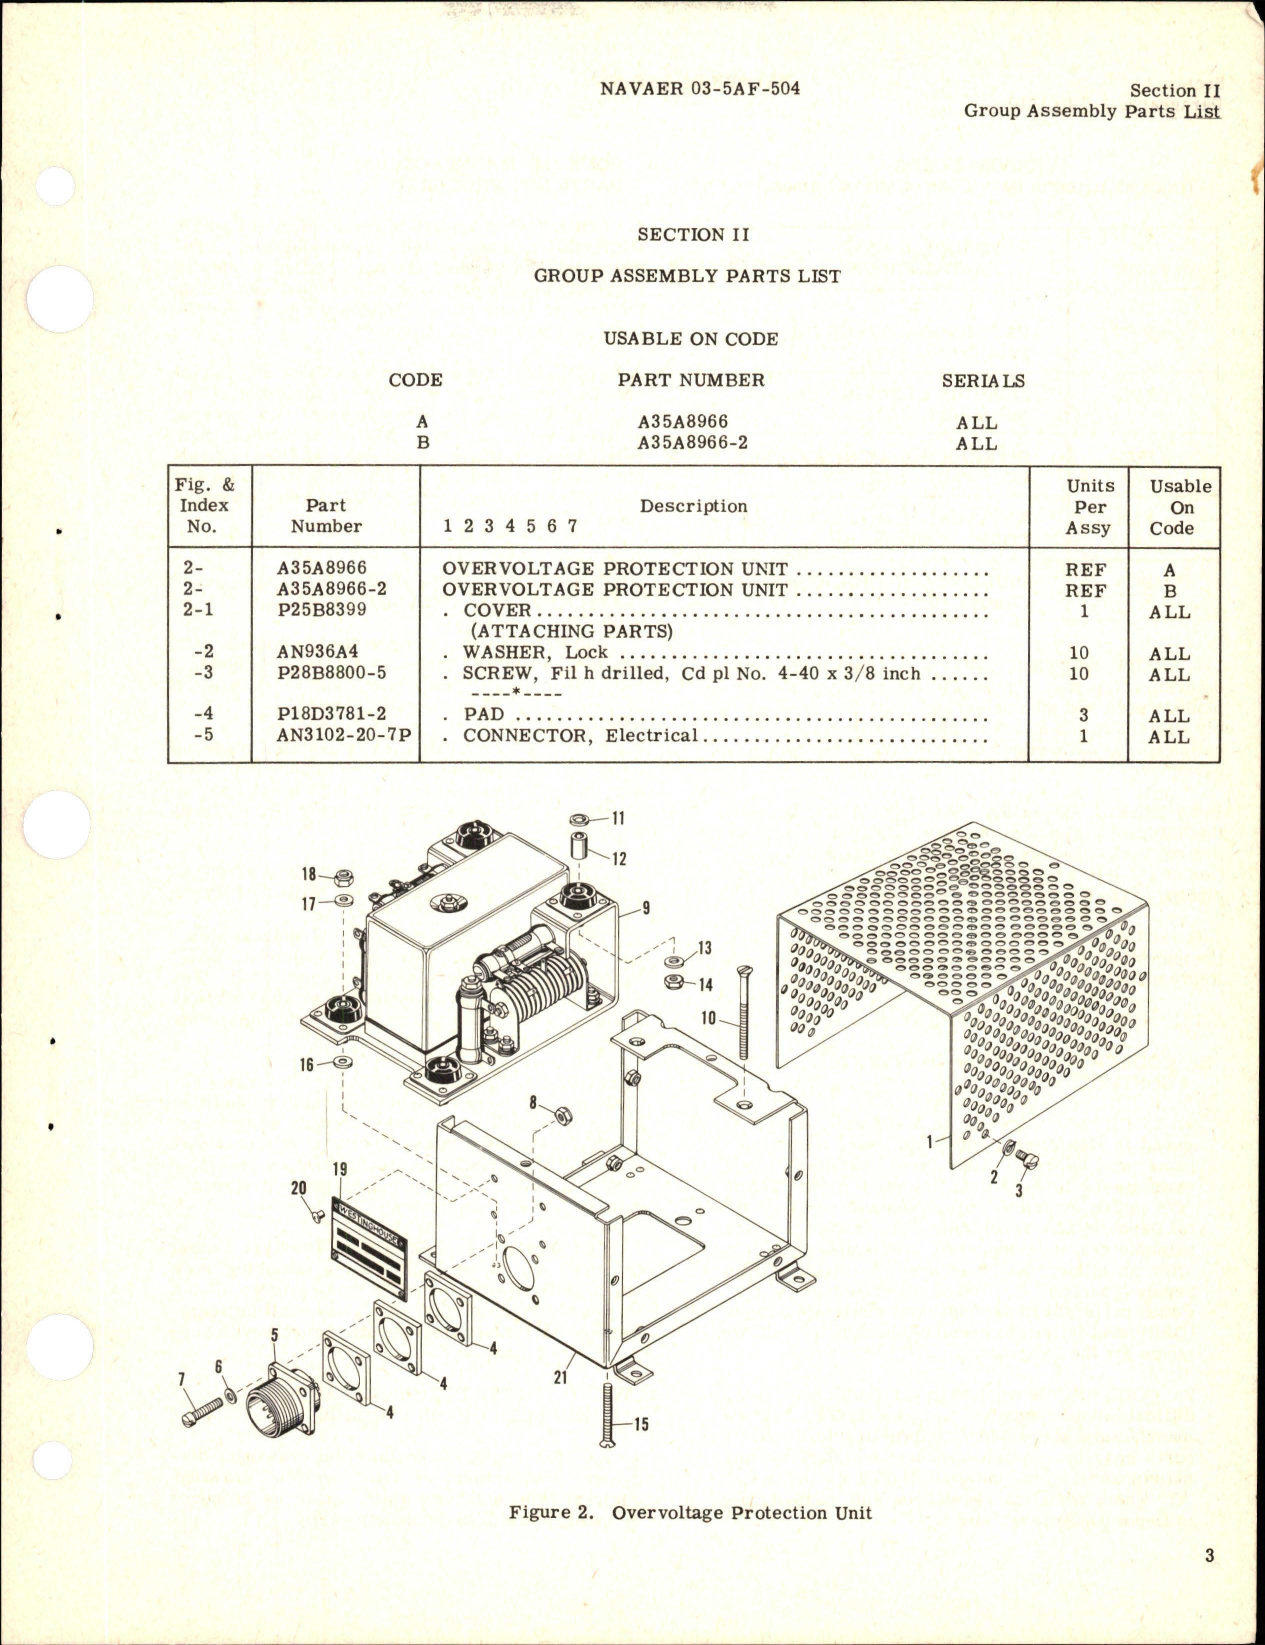 Sample page 5 from AirCorps Library document: Illustrated Parts Breakdown for Overvoltage Protection Unit - Models A35A8966 and A35A8966-2